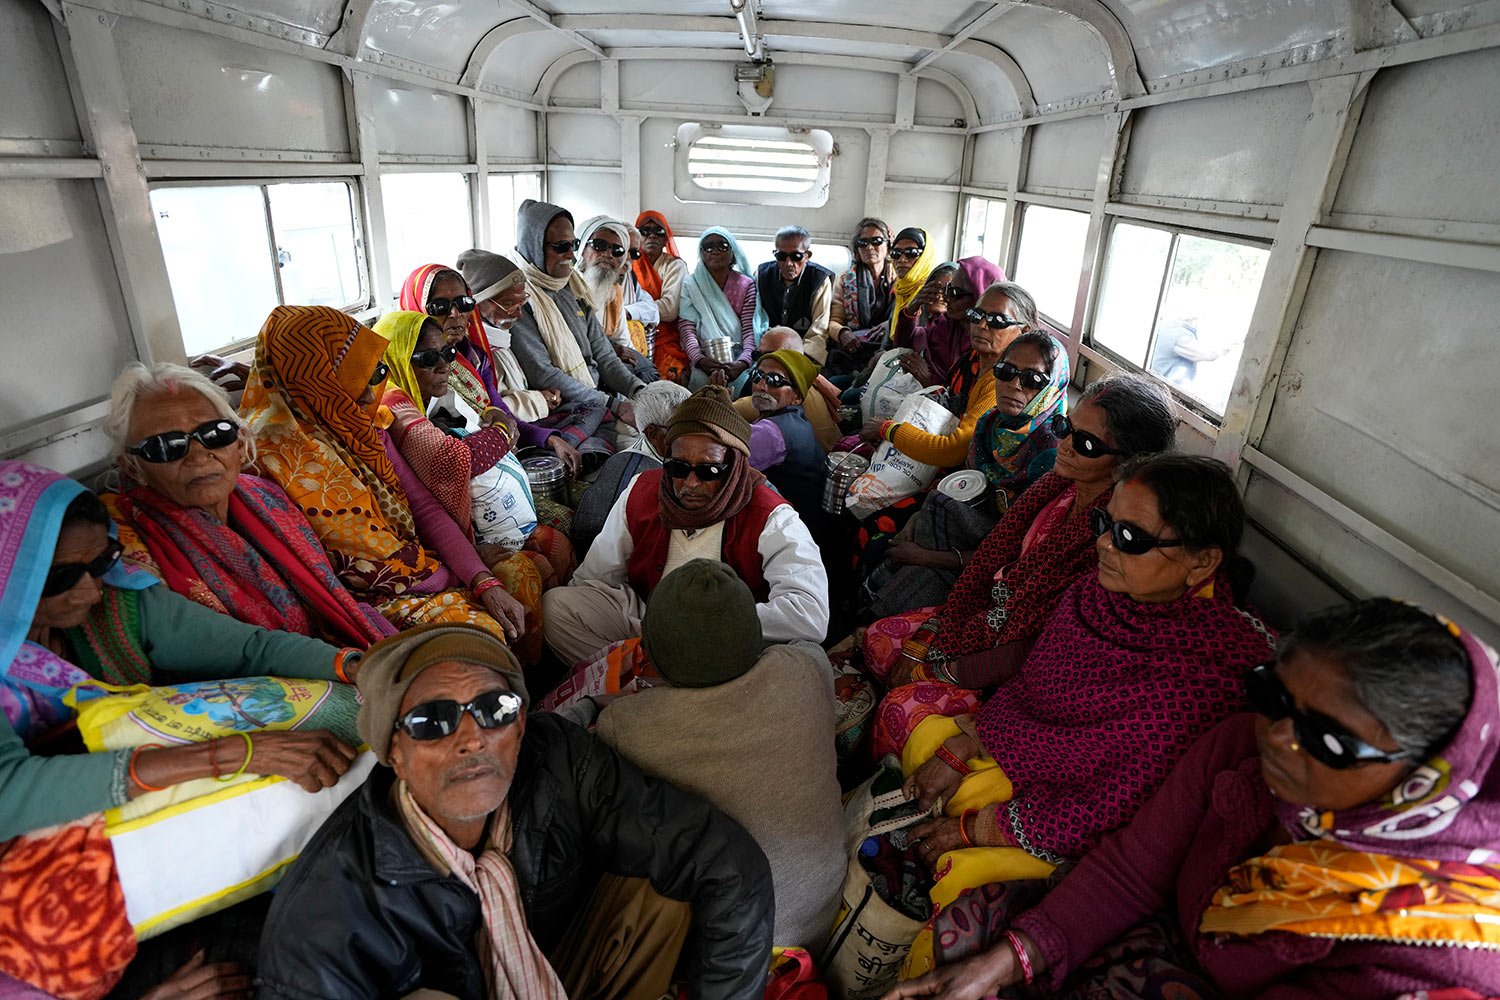  Elderly Indian villagers sit in a vehicle after being discharged from cataract surgery at an eye camp organized by Manohar Das Netra Chikitsalay in Prayagraj, in the northern Indian state of Uttar Pradesh, India. Friday, Dec. 9, 2022. (AP Photo/Raje